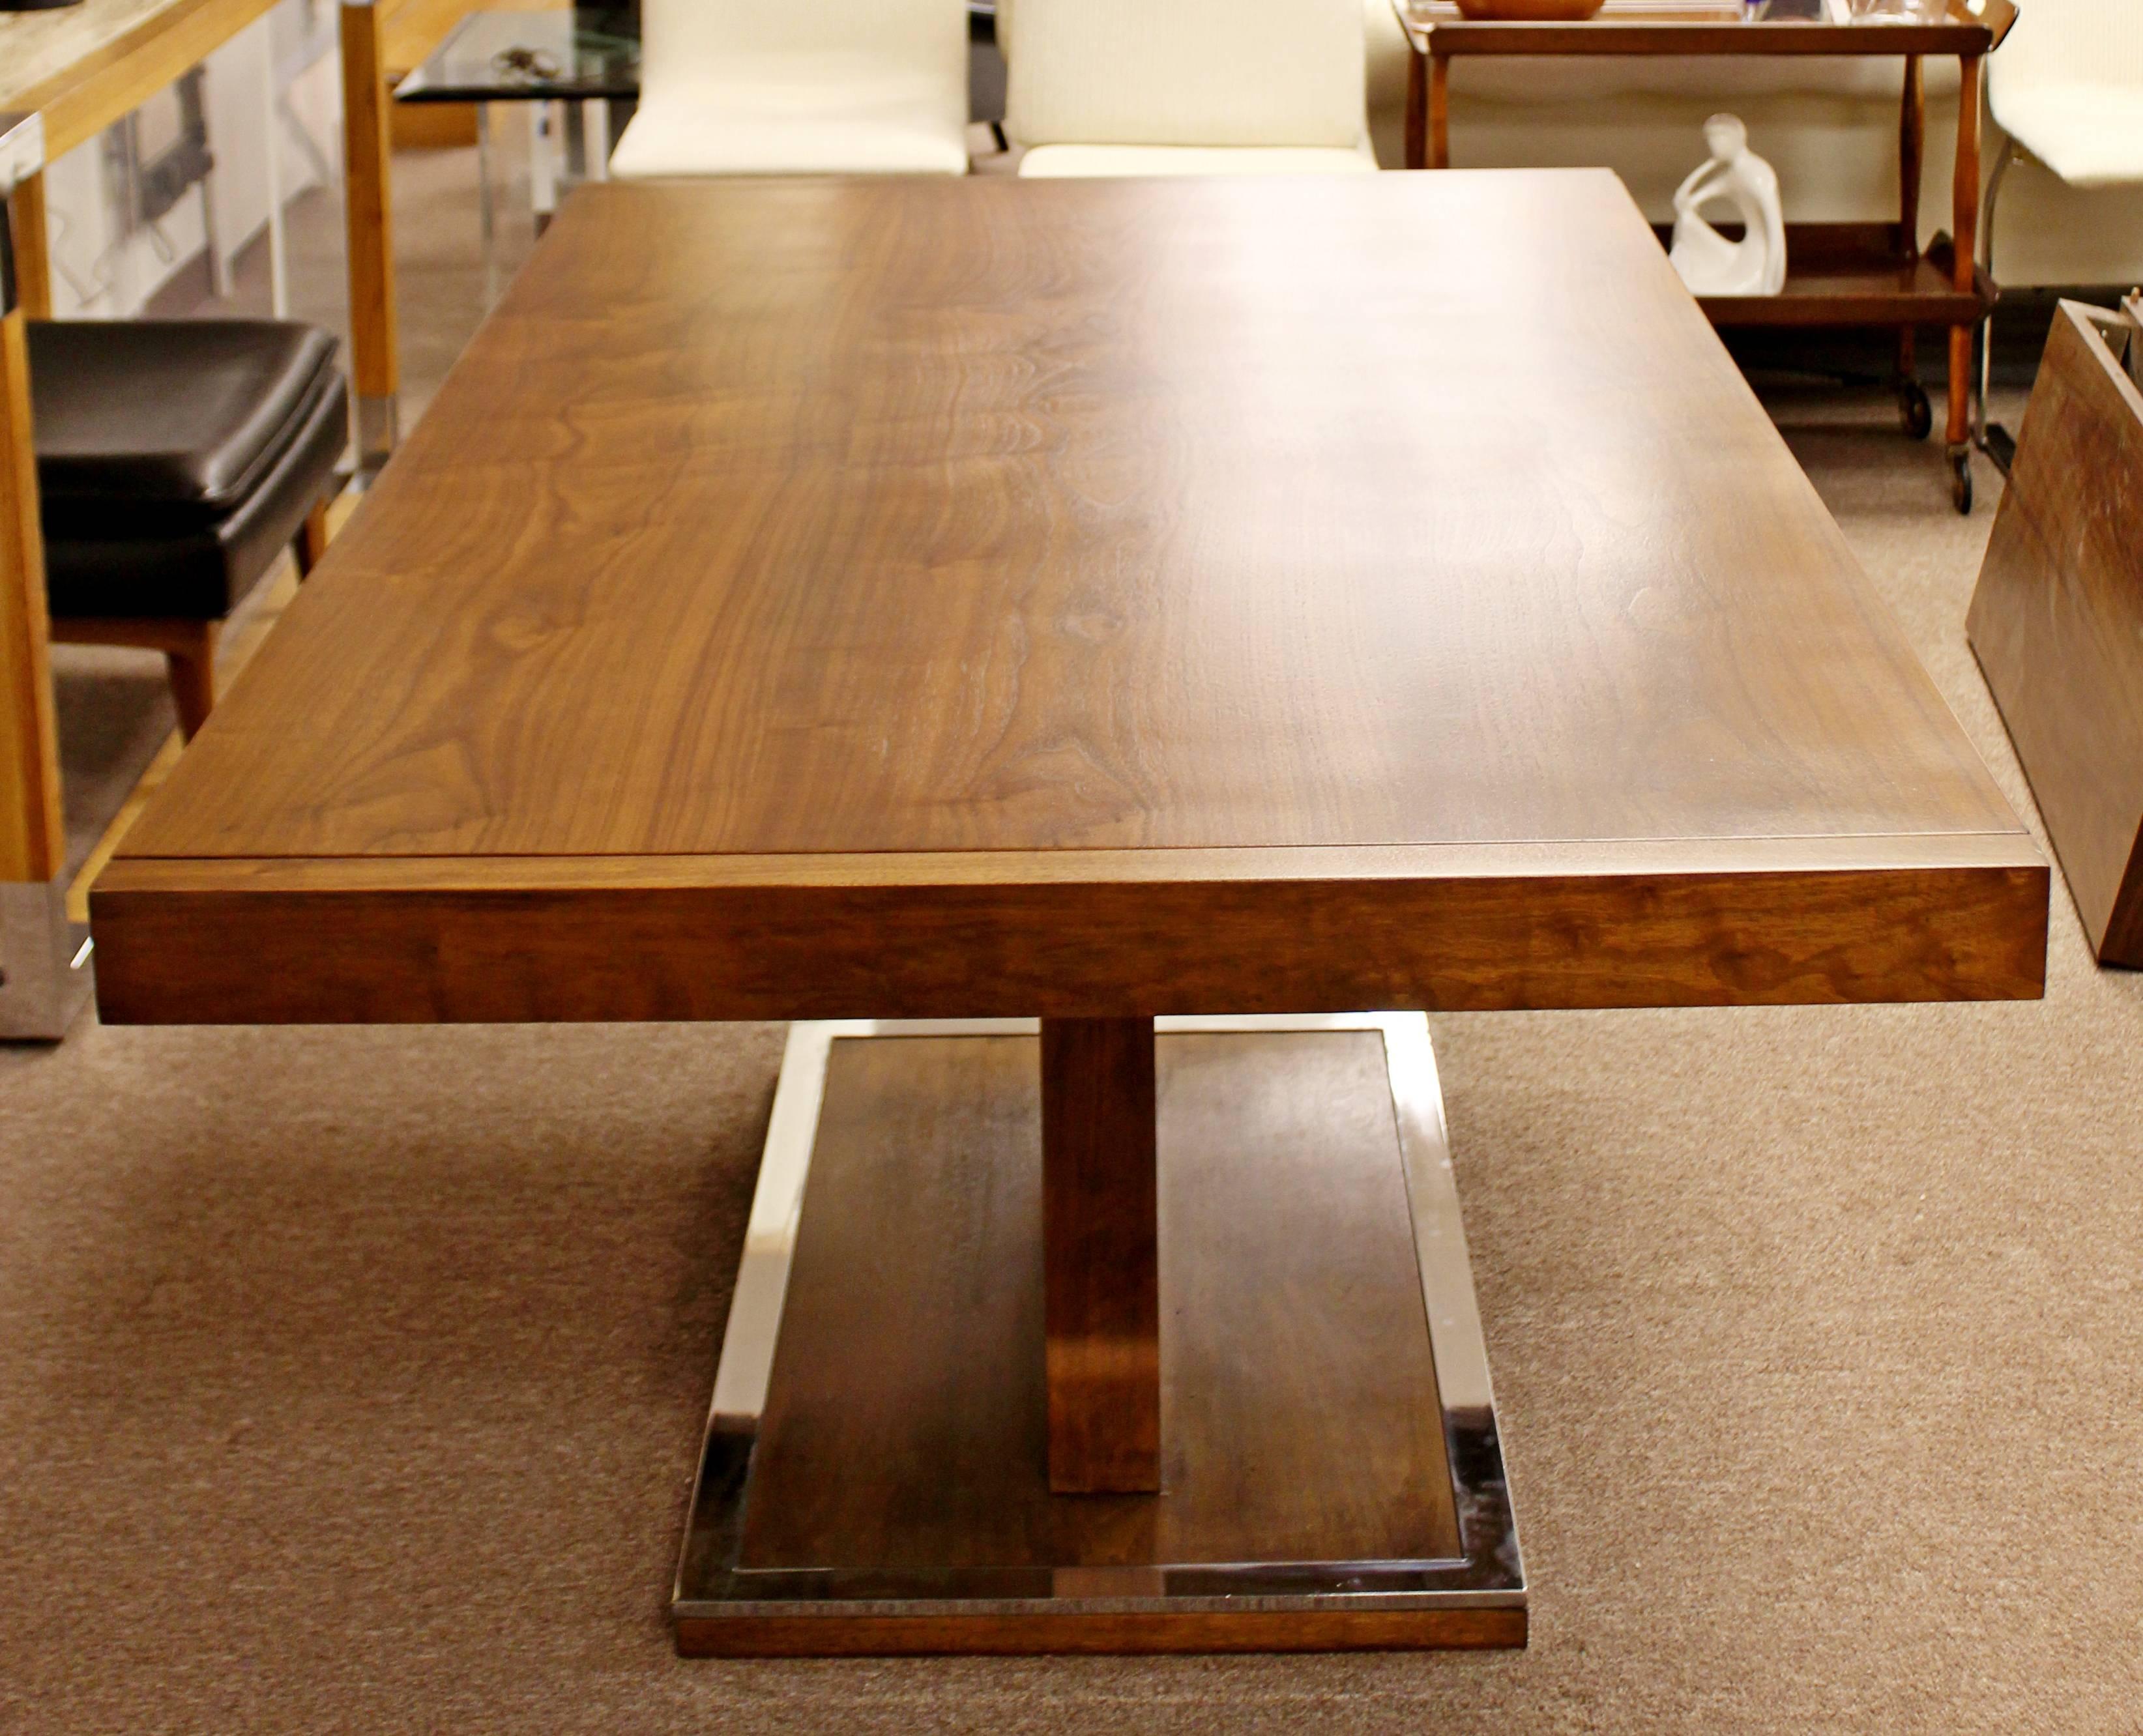 For your consideration is a fabulously unique, expandable, walnut dining table, with a chrome edged pedestal base and two leafs, by Milo Baughman for Founders Furniture Company, circa 1970s. In great condition. The dimensions are 68